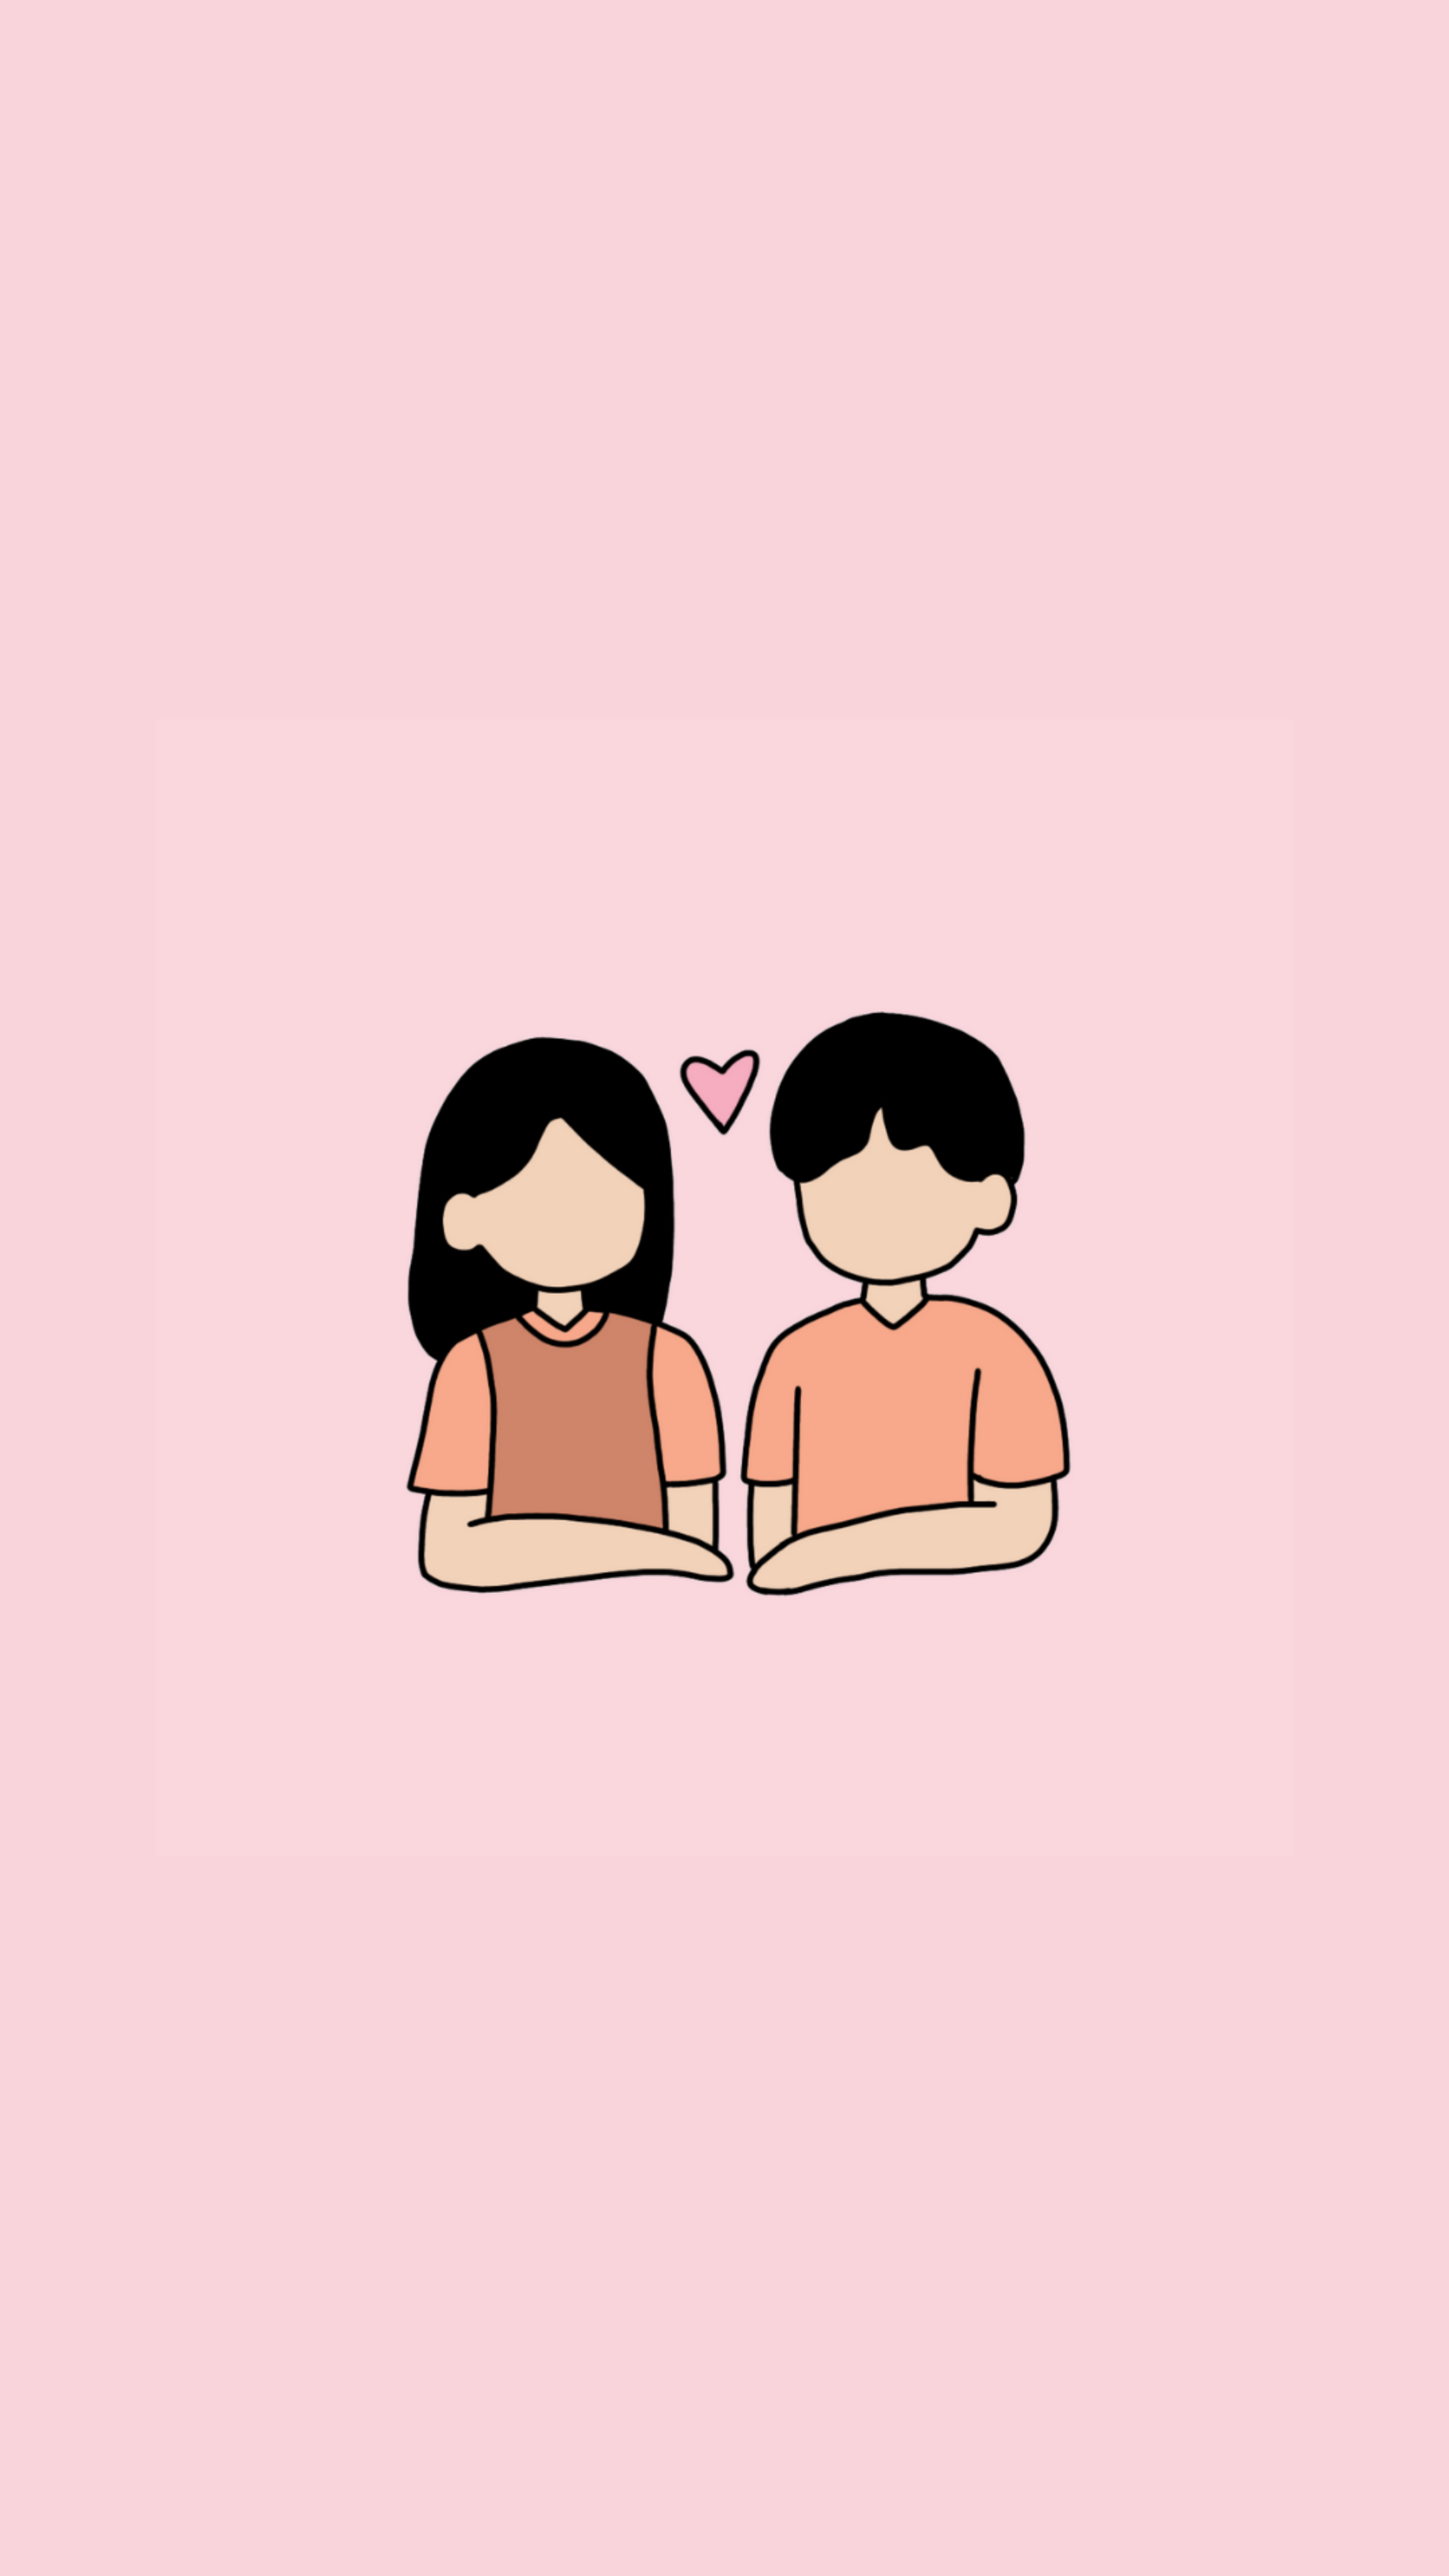 ivoci - Free Download: Cute Couple Illustration Phone Wallpapers - 6